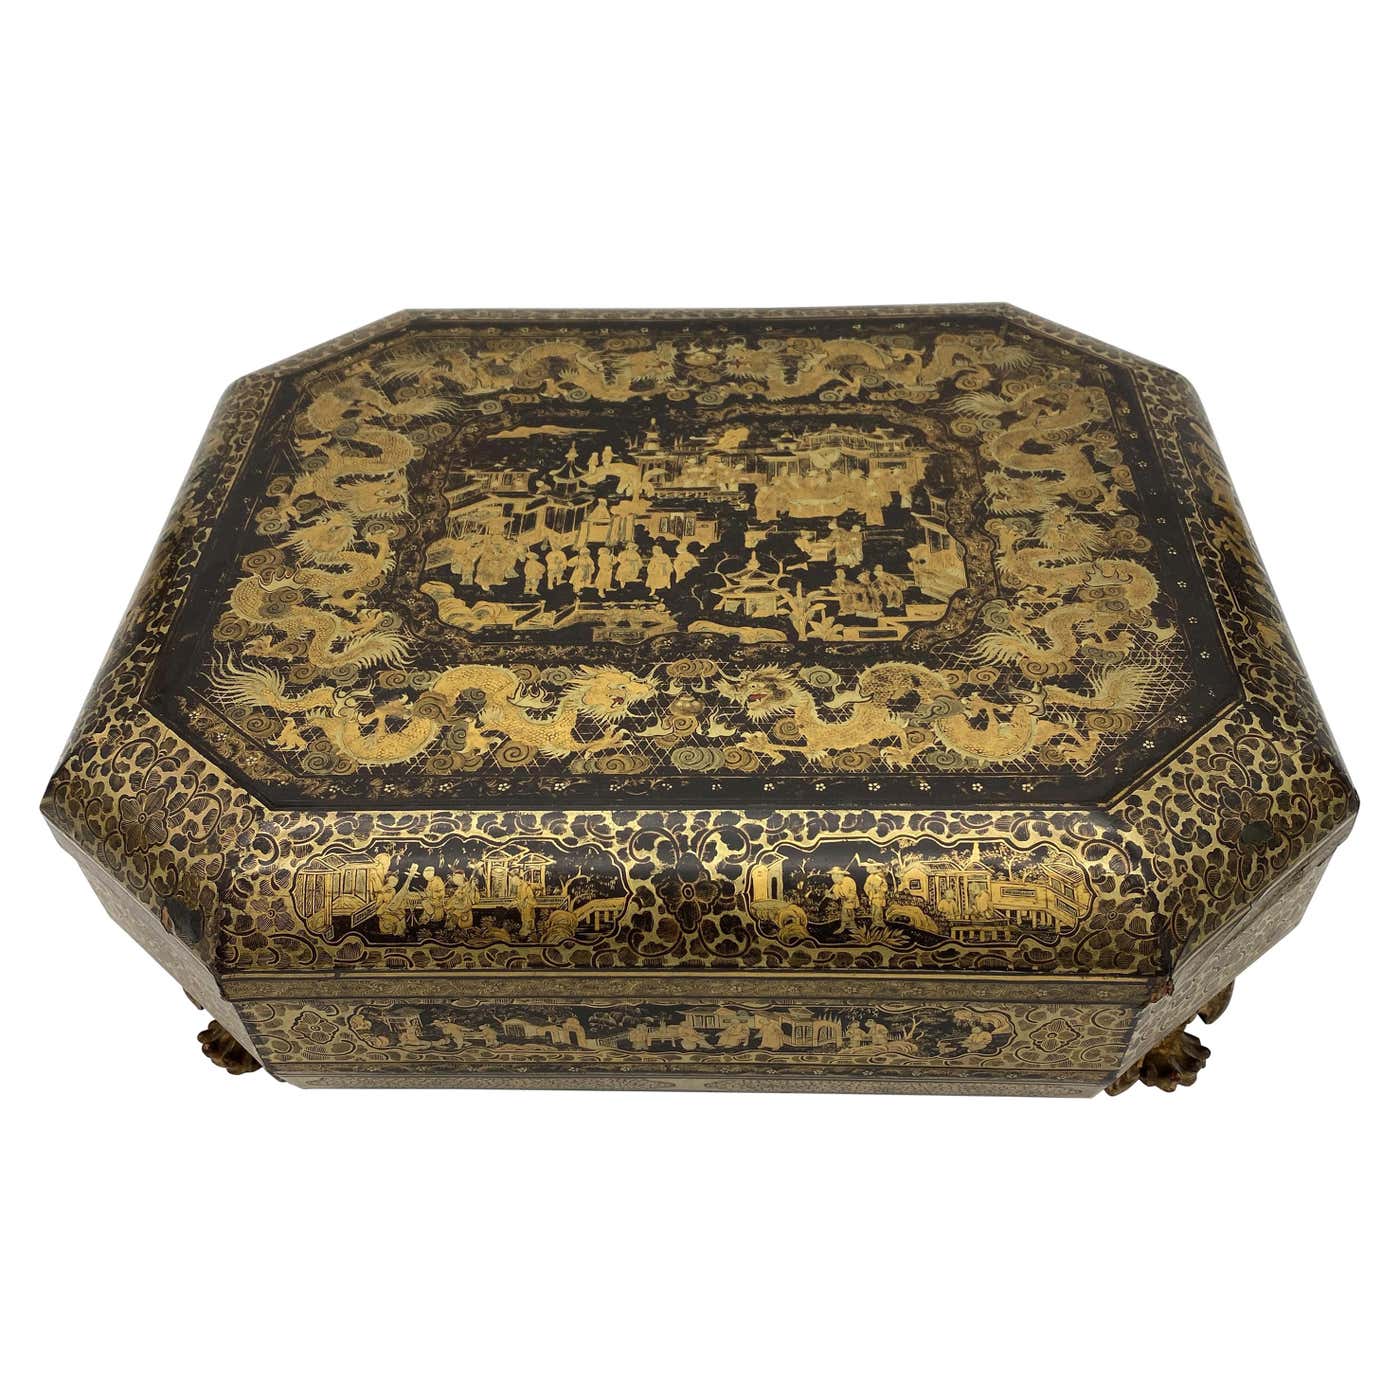 Antique 19th Century Export Chinese Lacquer Gaming Box For Sale at 1stDibs